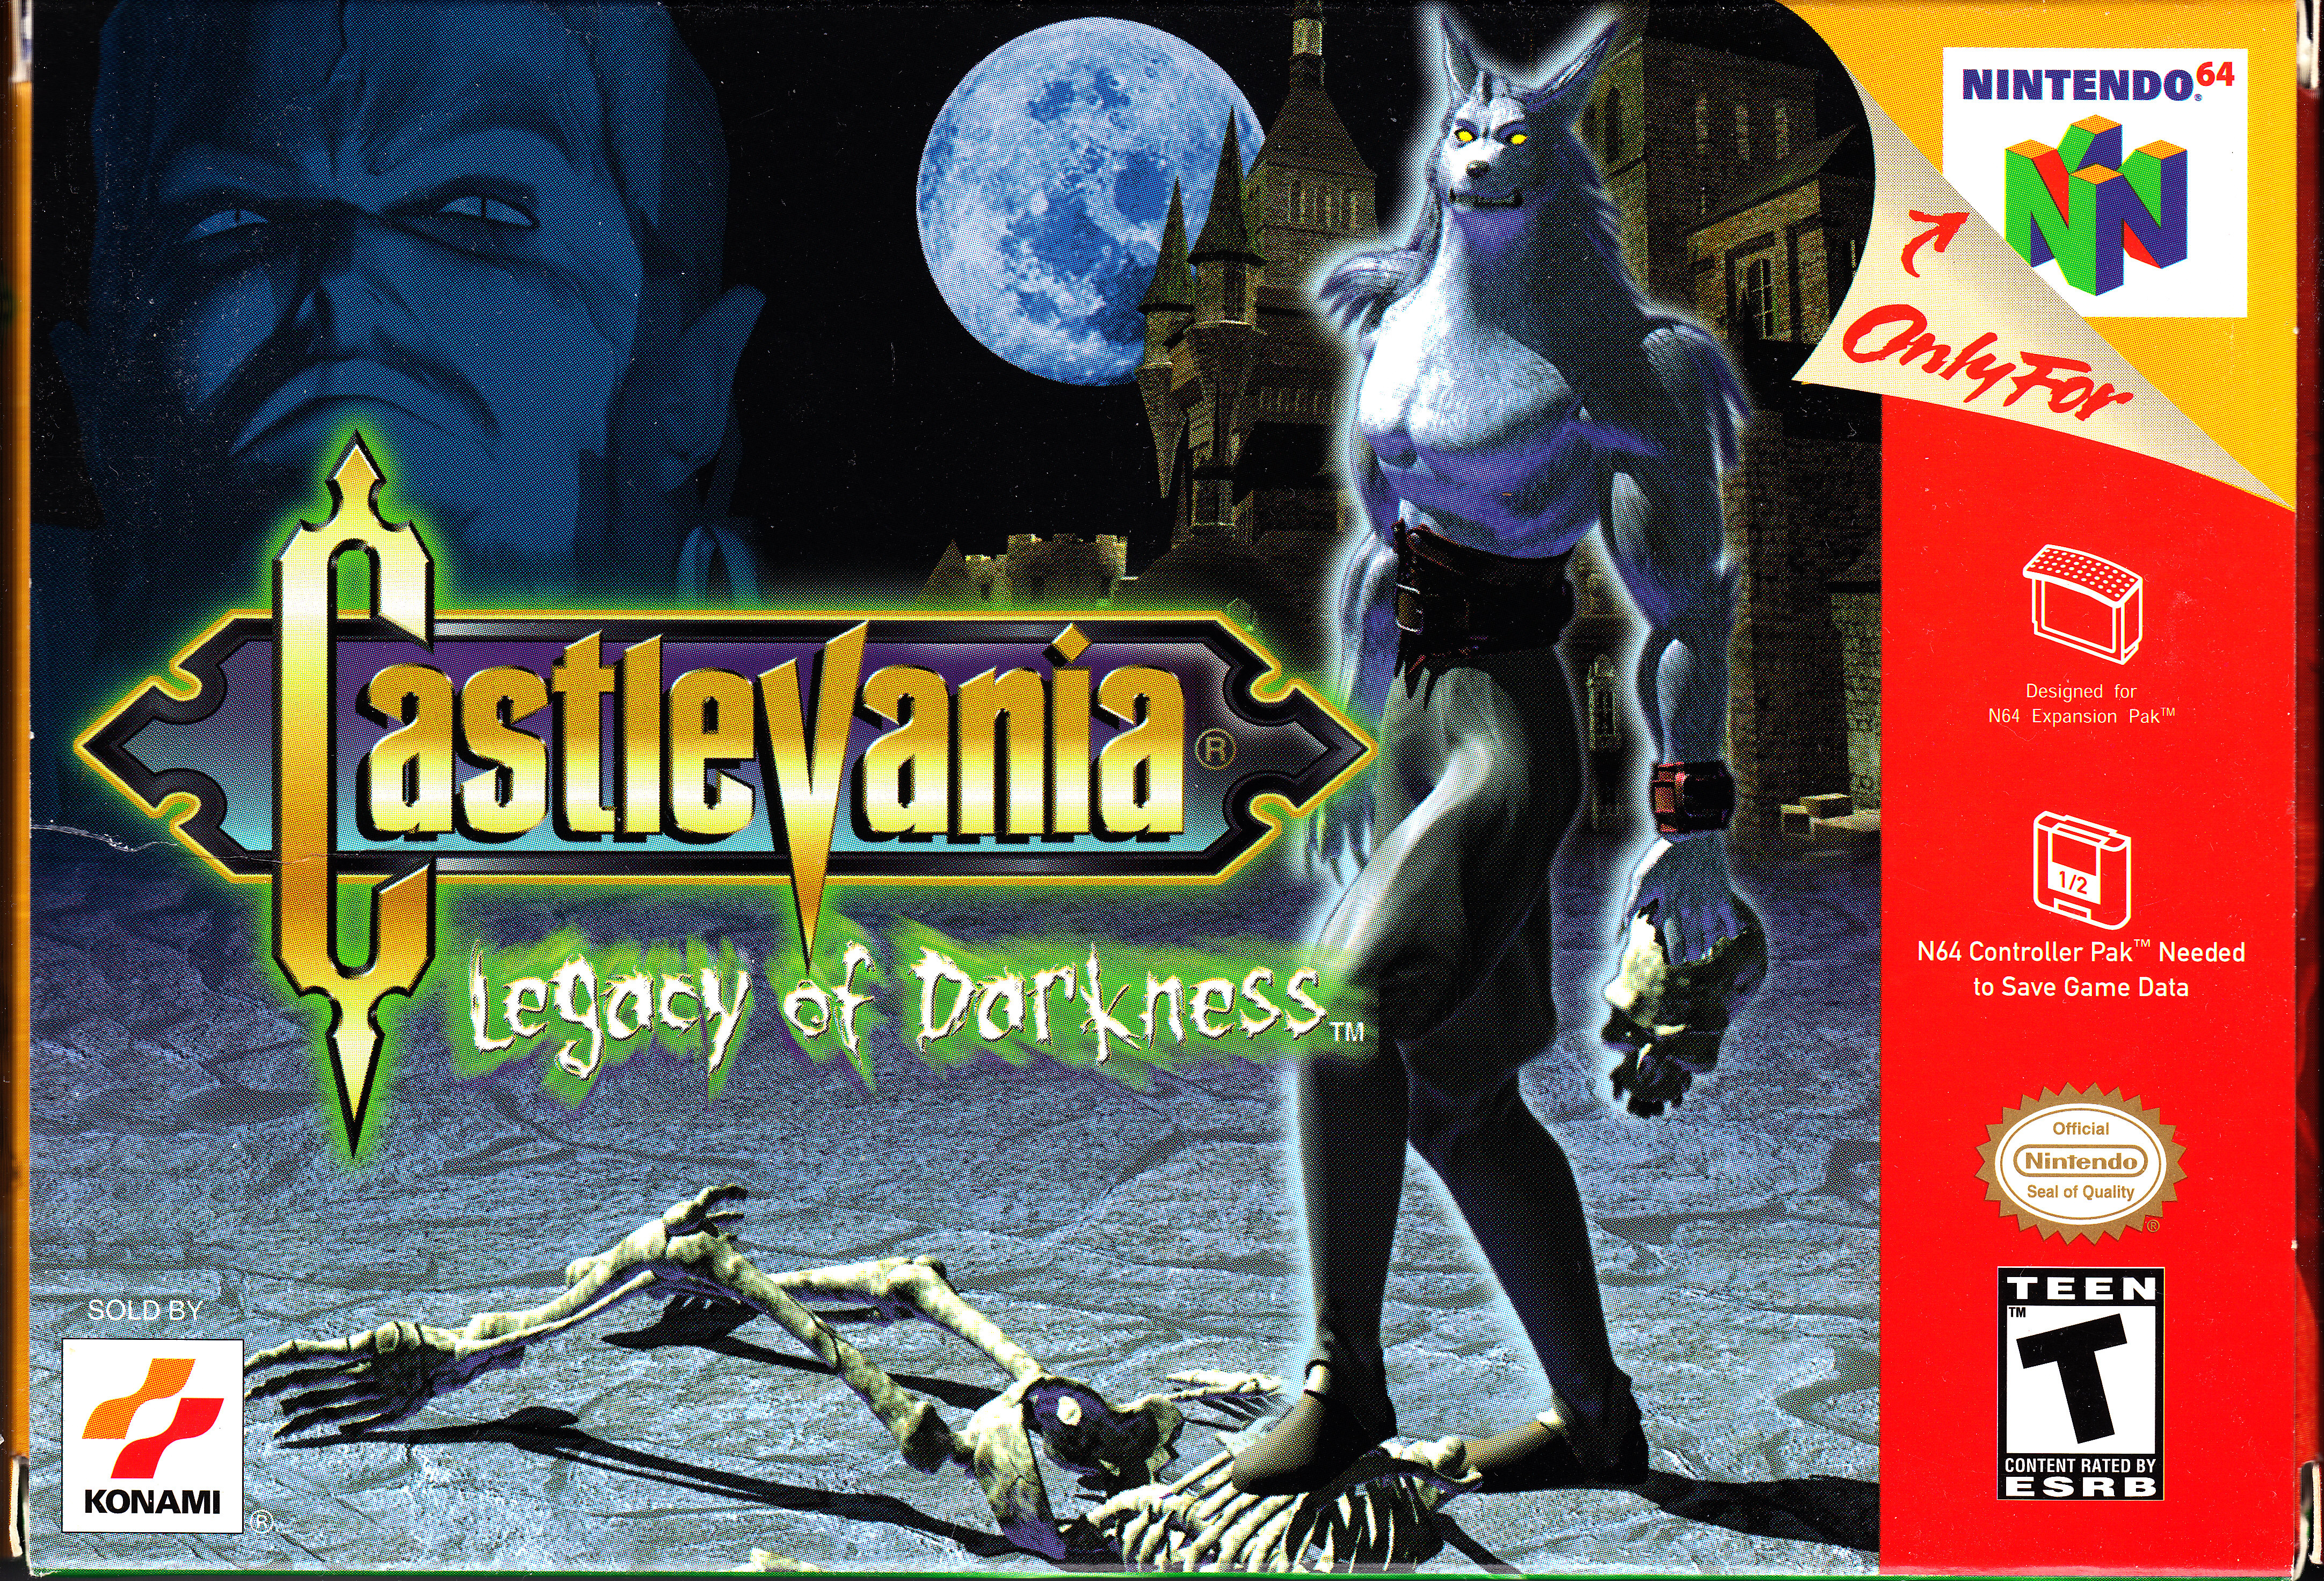 Nintendo%2064%20Castlevania%20Legacy%20of%20Darkness%20Front%20Cover.jpg